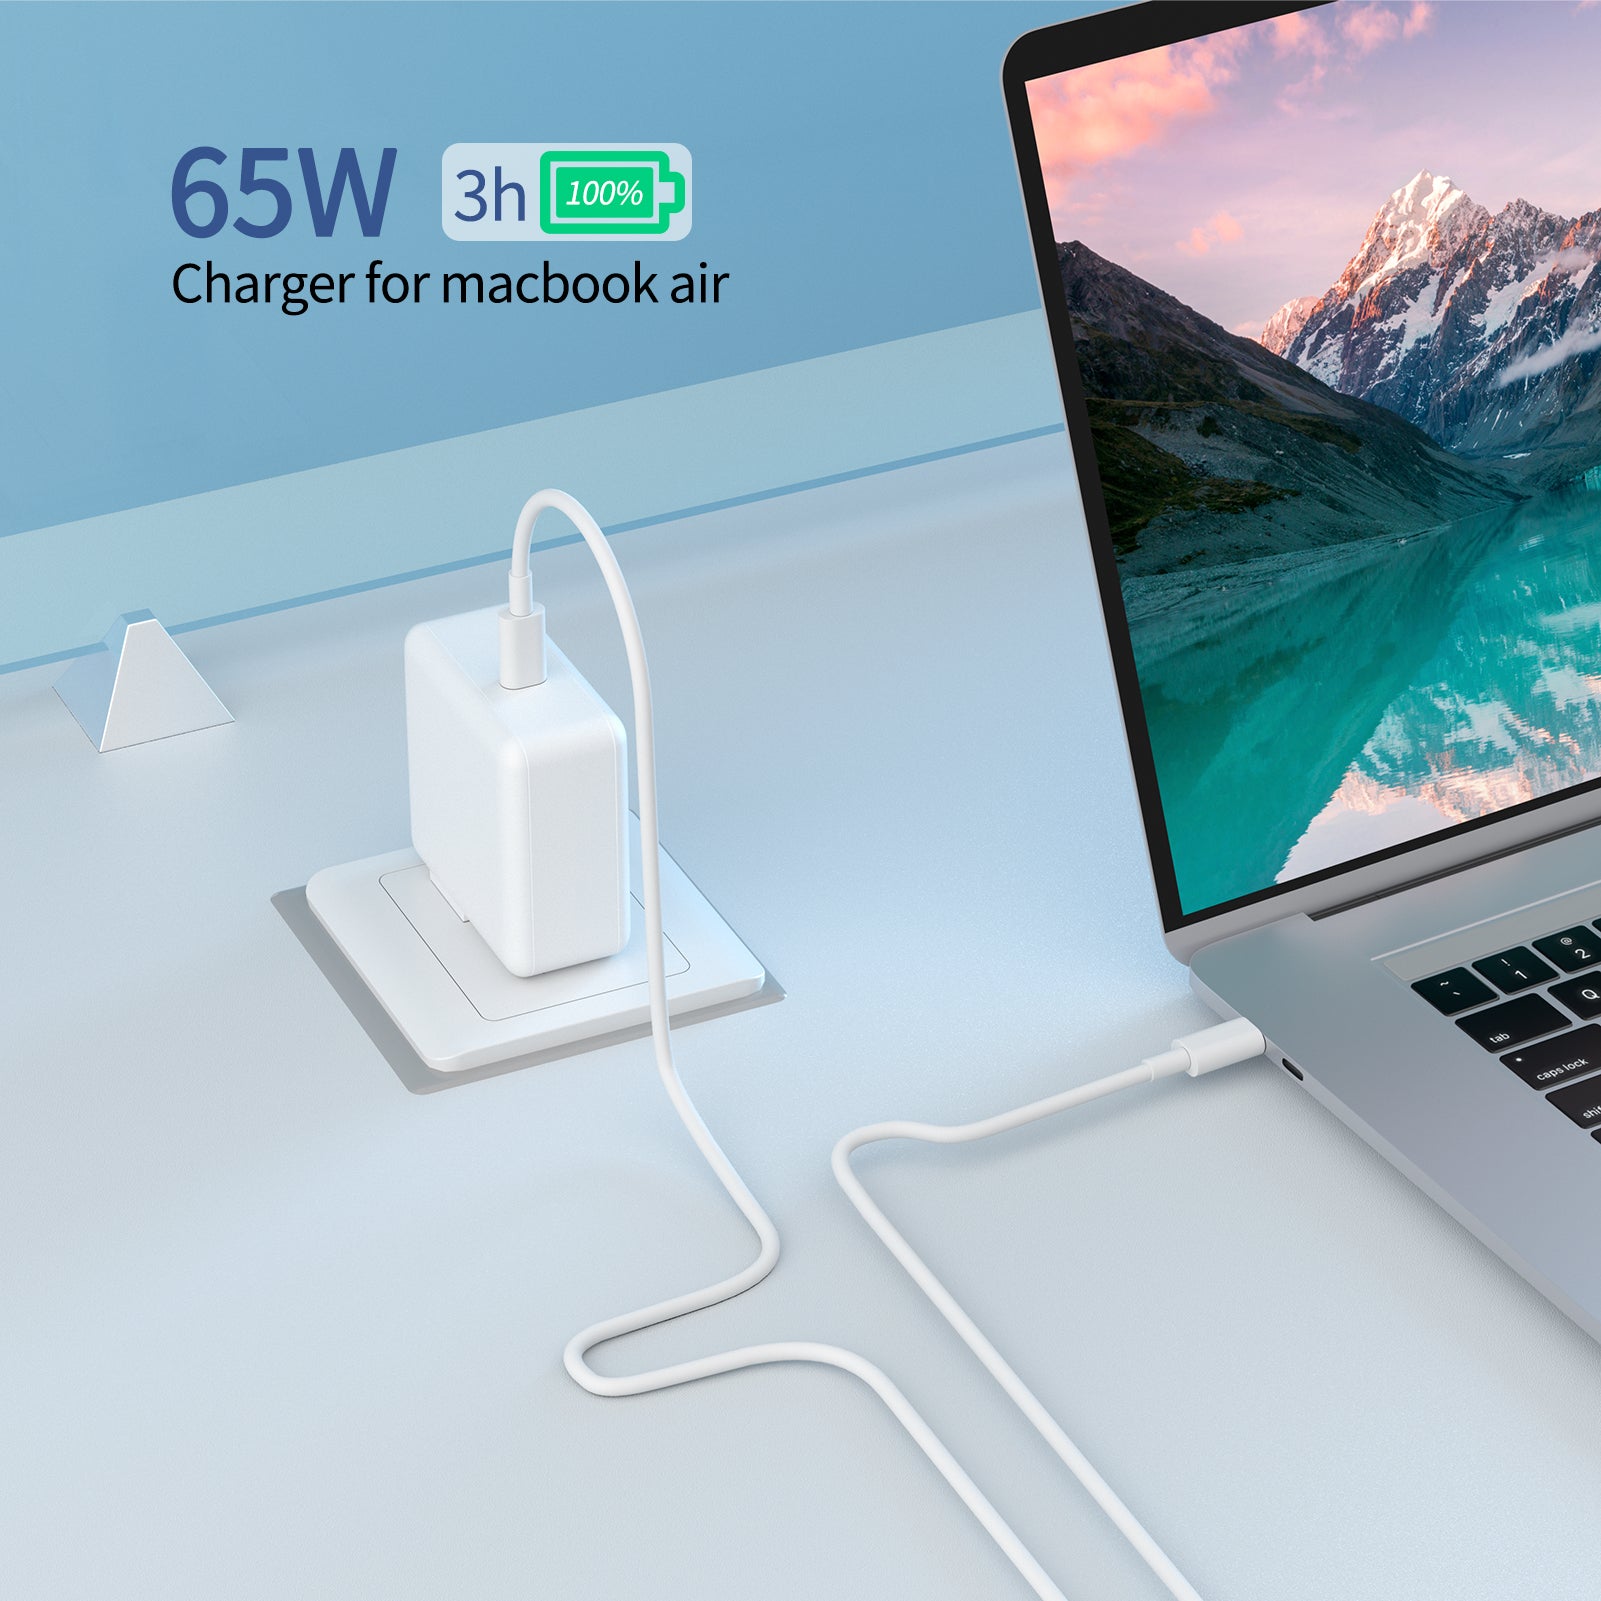 65W USB C Fast Charger, Ablegrid Type C Charger for MacBook Pro, Dell Latitude and Any Laptops or Smart Phones Include Charge Cable（6.6ft/1.8m）